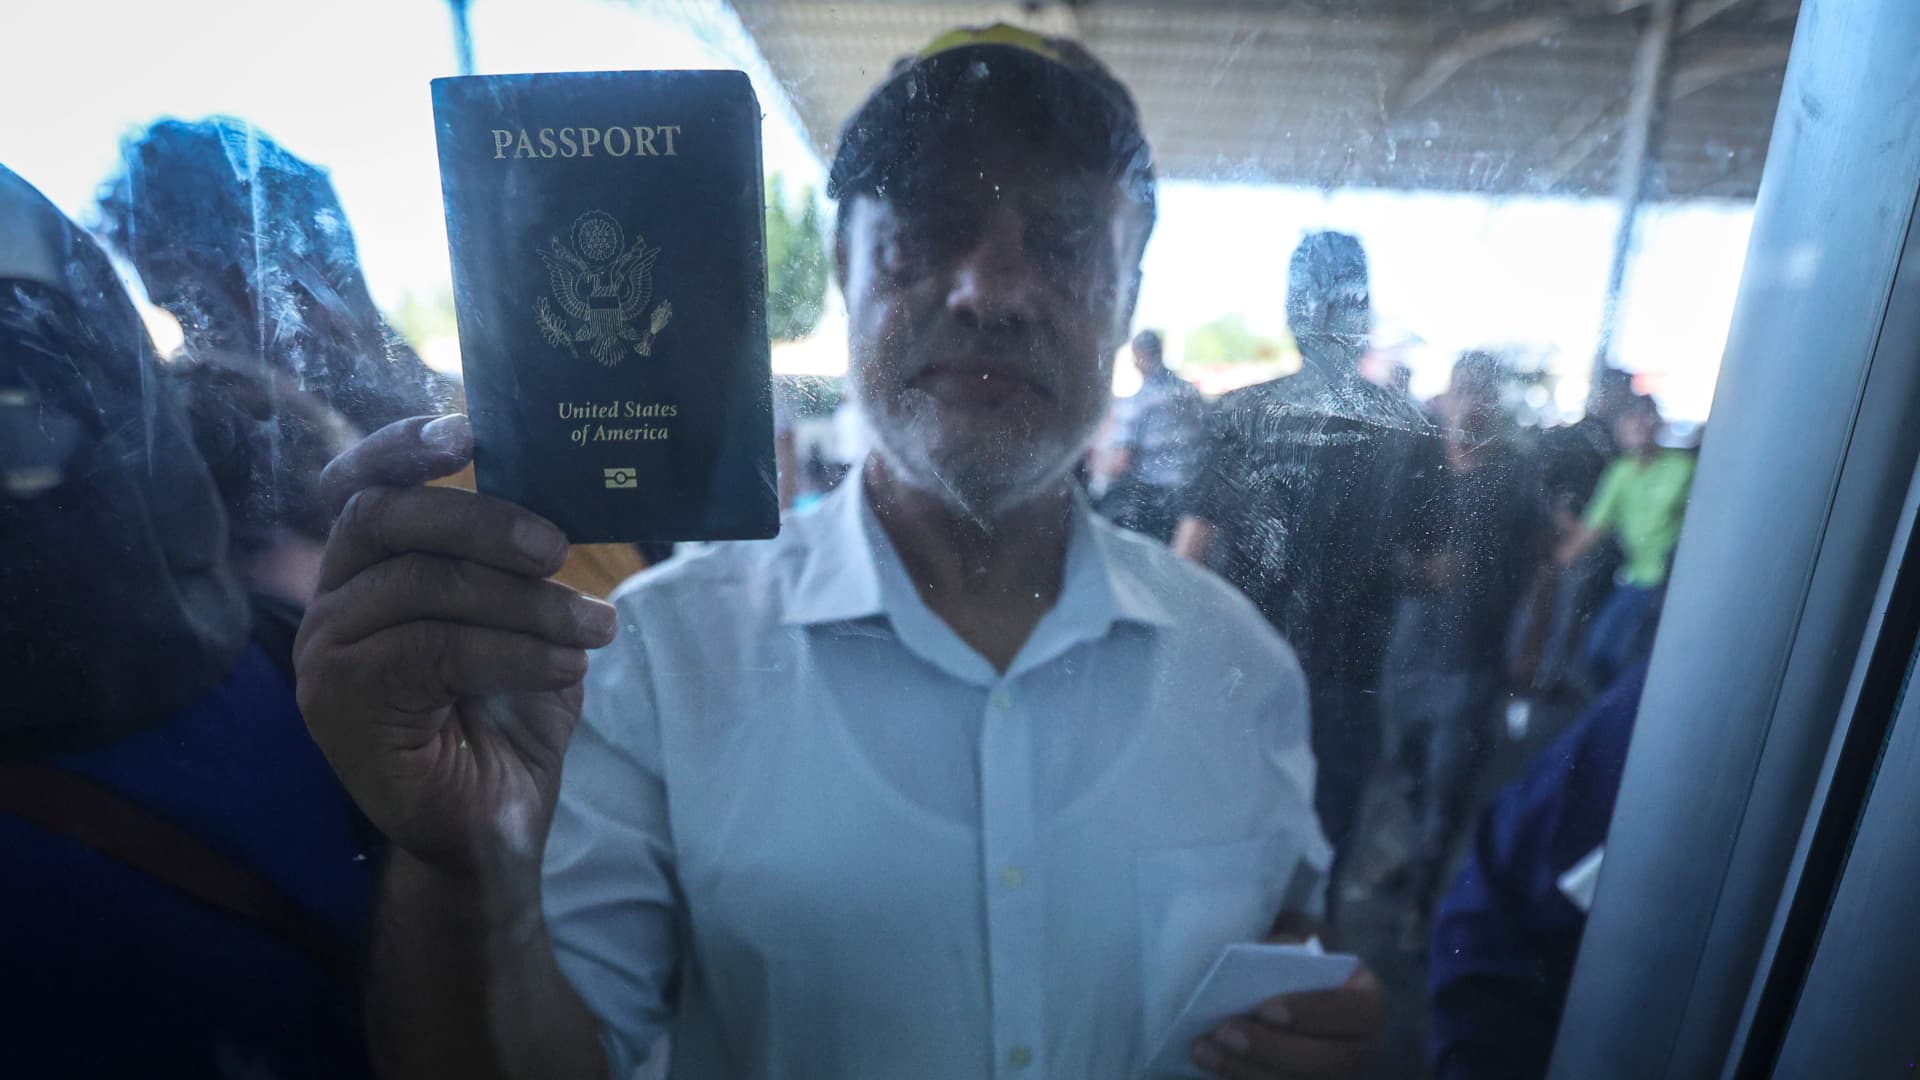 A Palestinian with dual citizenship shows his United States passport while seeking permission to leave Gaza at the Rafah border crossing into Egypt in Rafah, Gaza, on Wednesday, Nov. 1, 2023.